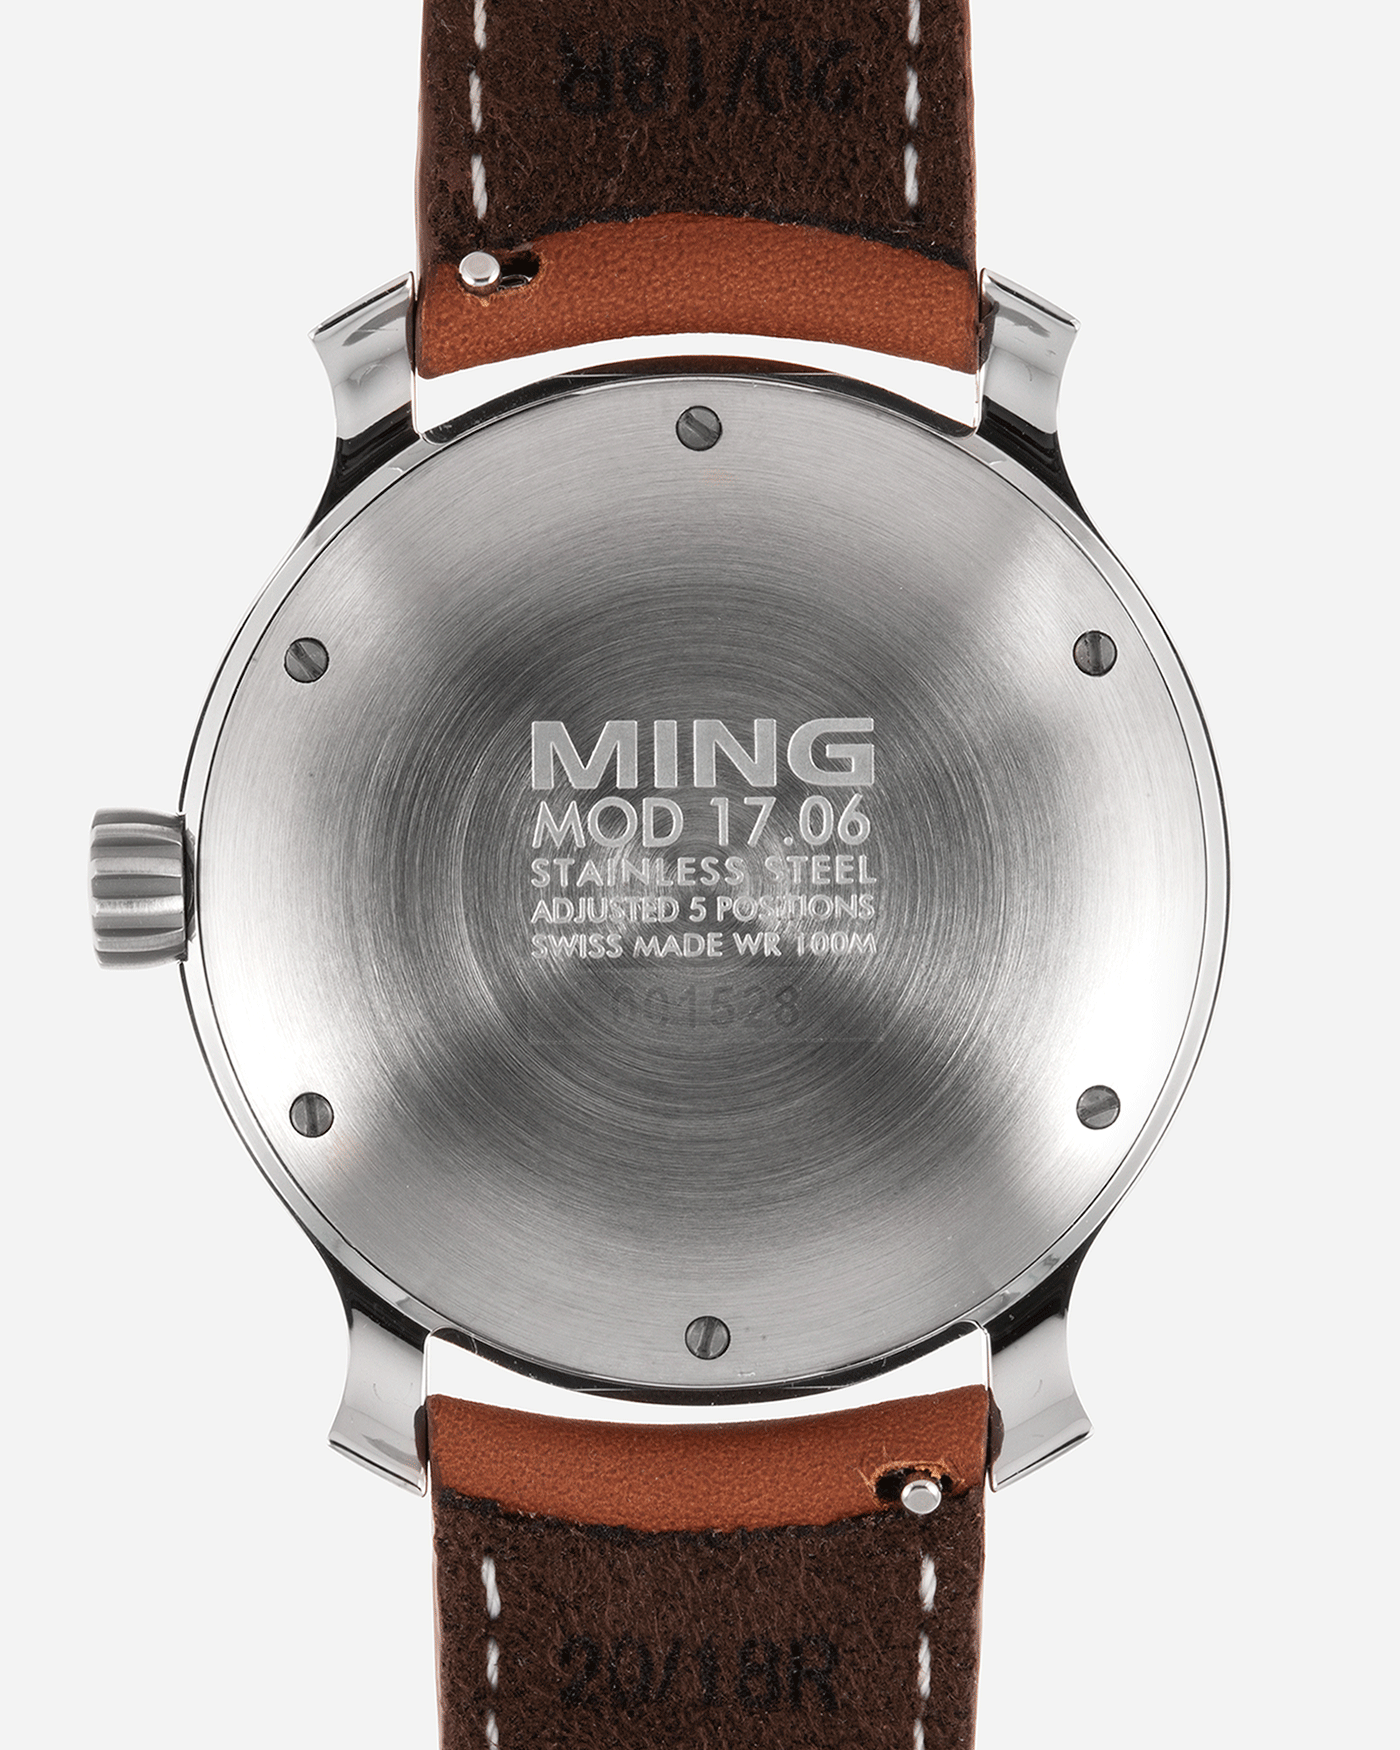 Brand: Ming Year: 2019 Model: 17.06 Material: Stainless Steel Movement: Heavily Modified ETA 2824-2 Case Diameter: 38mm Strap: Jean Rousseau Brown Smooth Calf for MINGBrand: Ming Year: 2019 Model: 17.06 Material: Stainless Steel Movement: Heavily Modified ETA 2824-2 Case Diameter: 38mm Strap: Jean Rousseau Brown Smooth Calf for MING